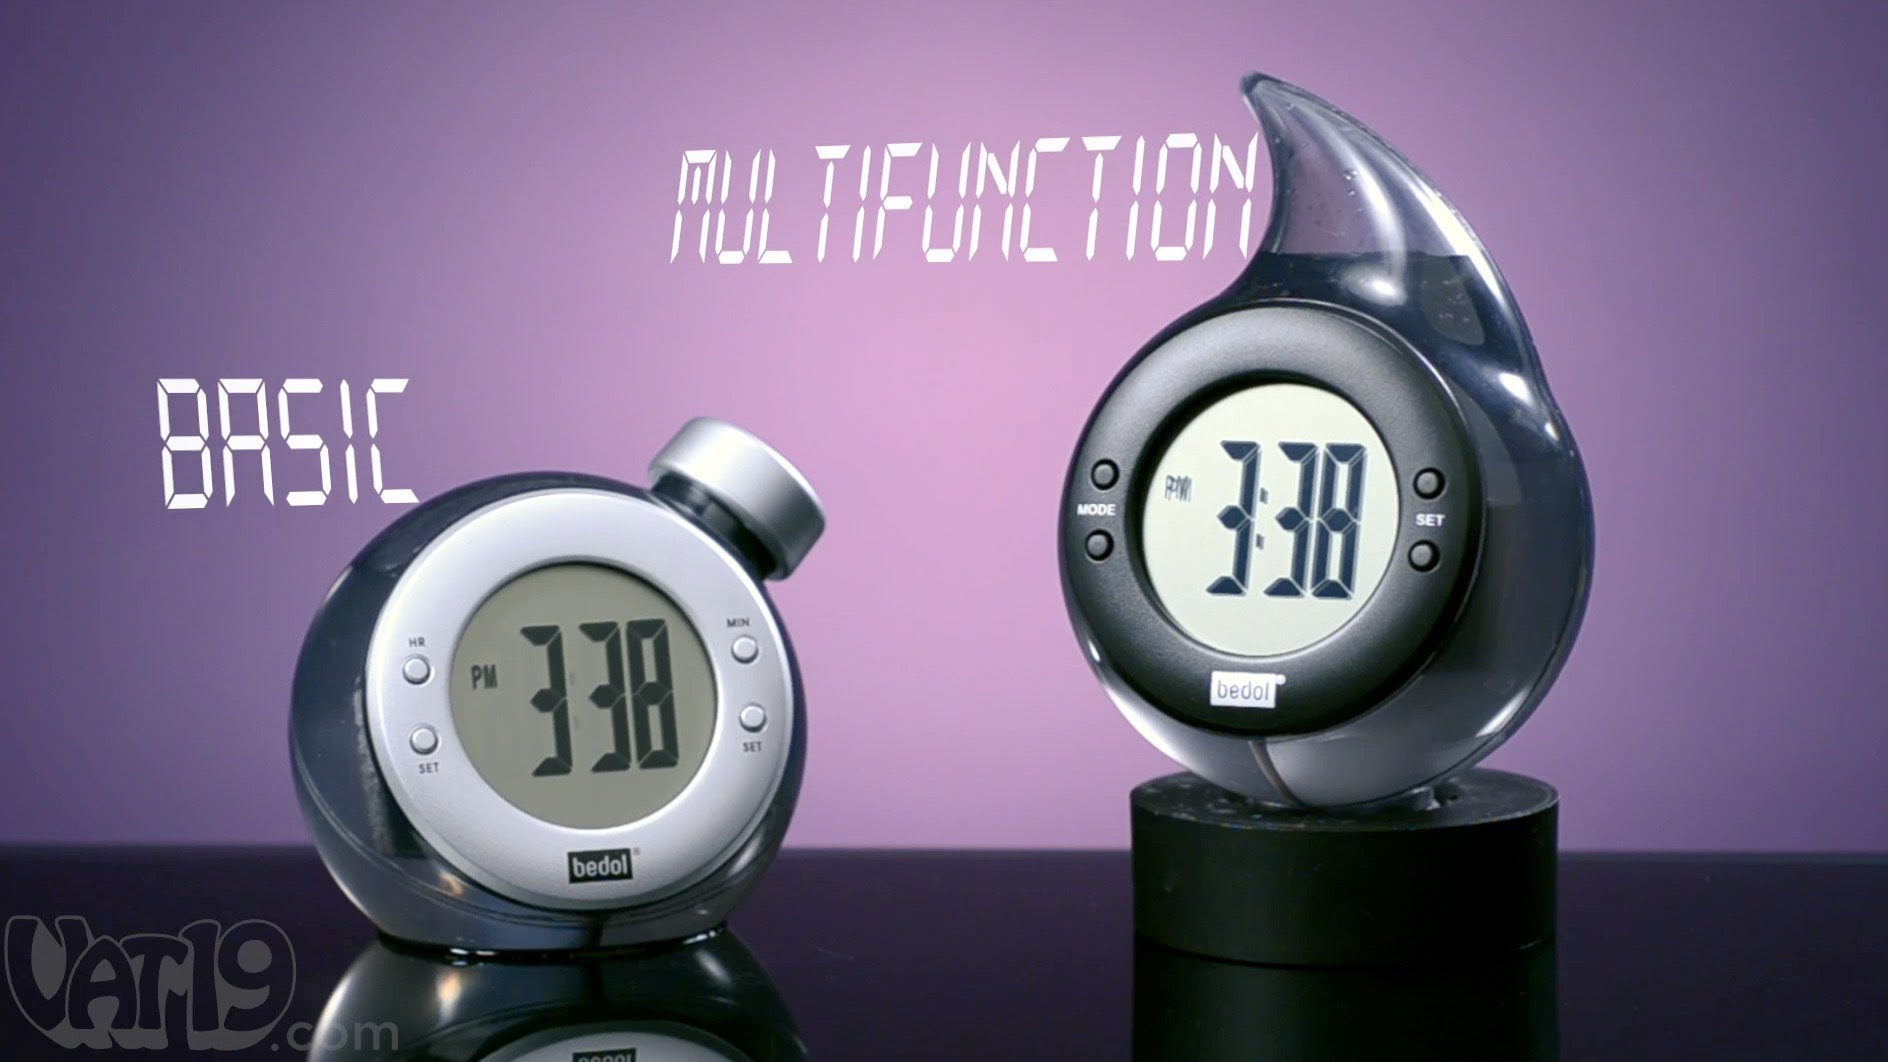 Water-Powered Clocks run for months solely on tap water! - YouTube